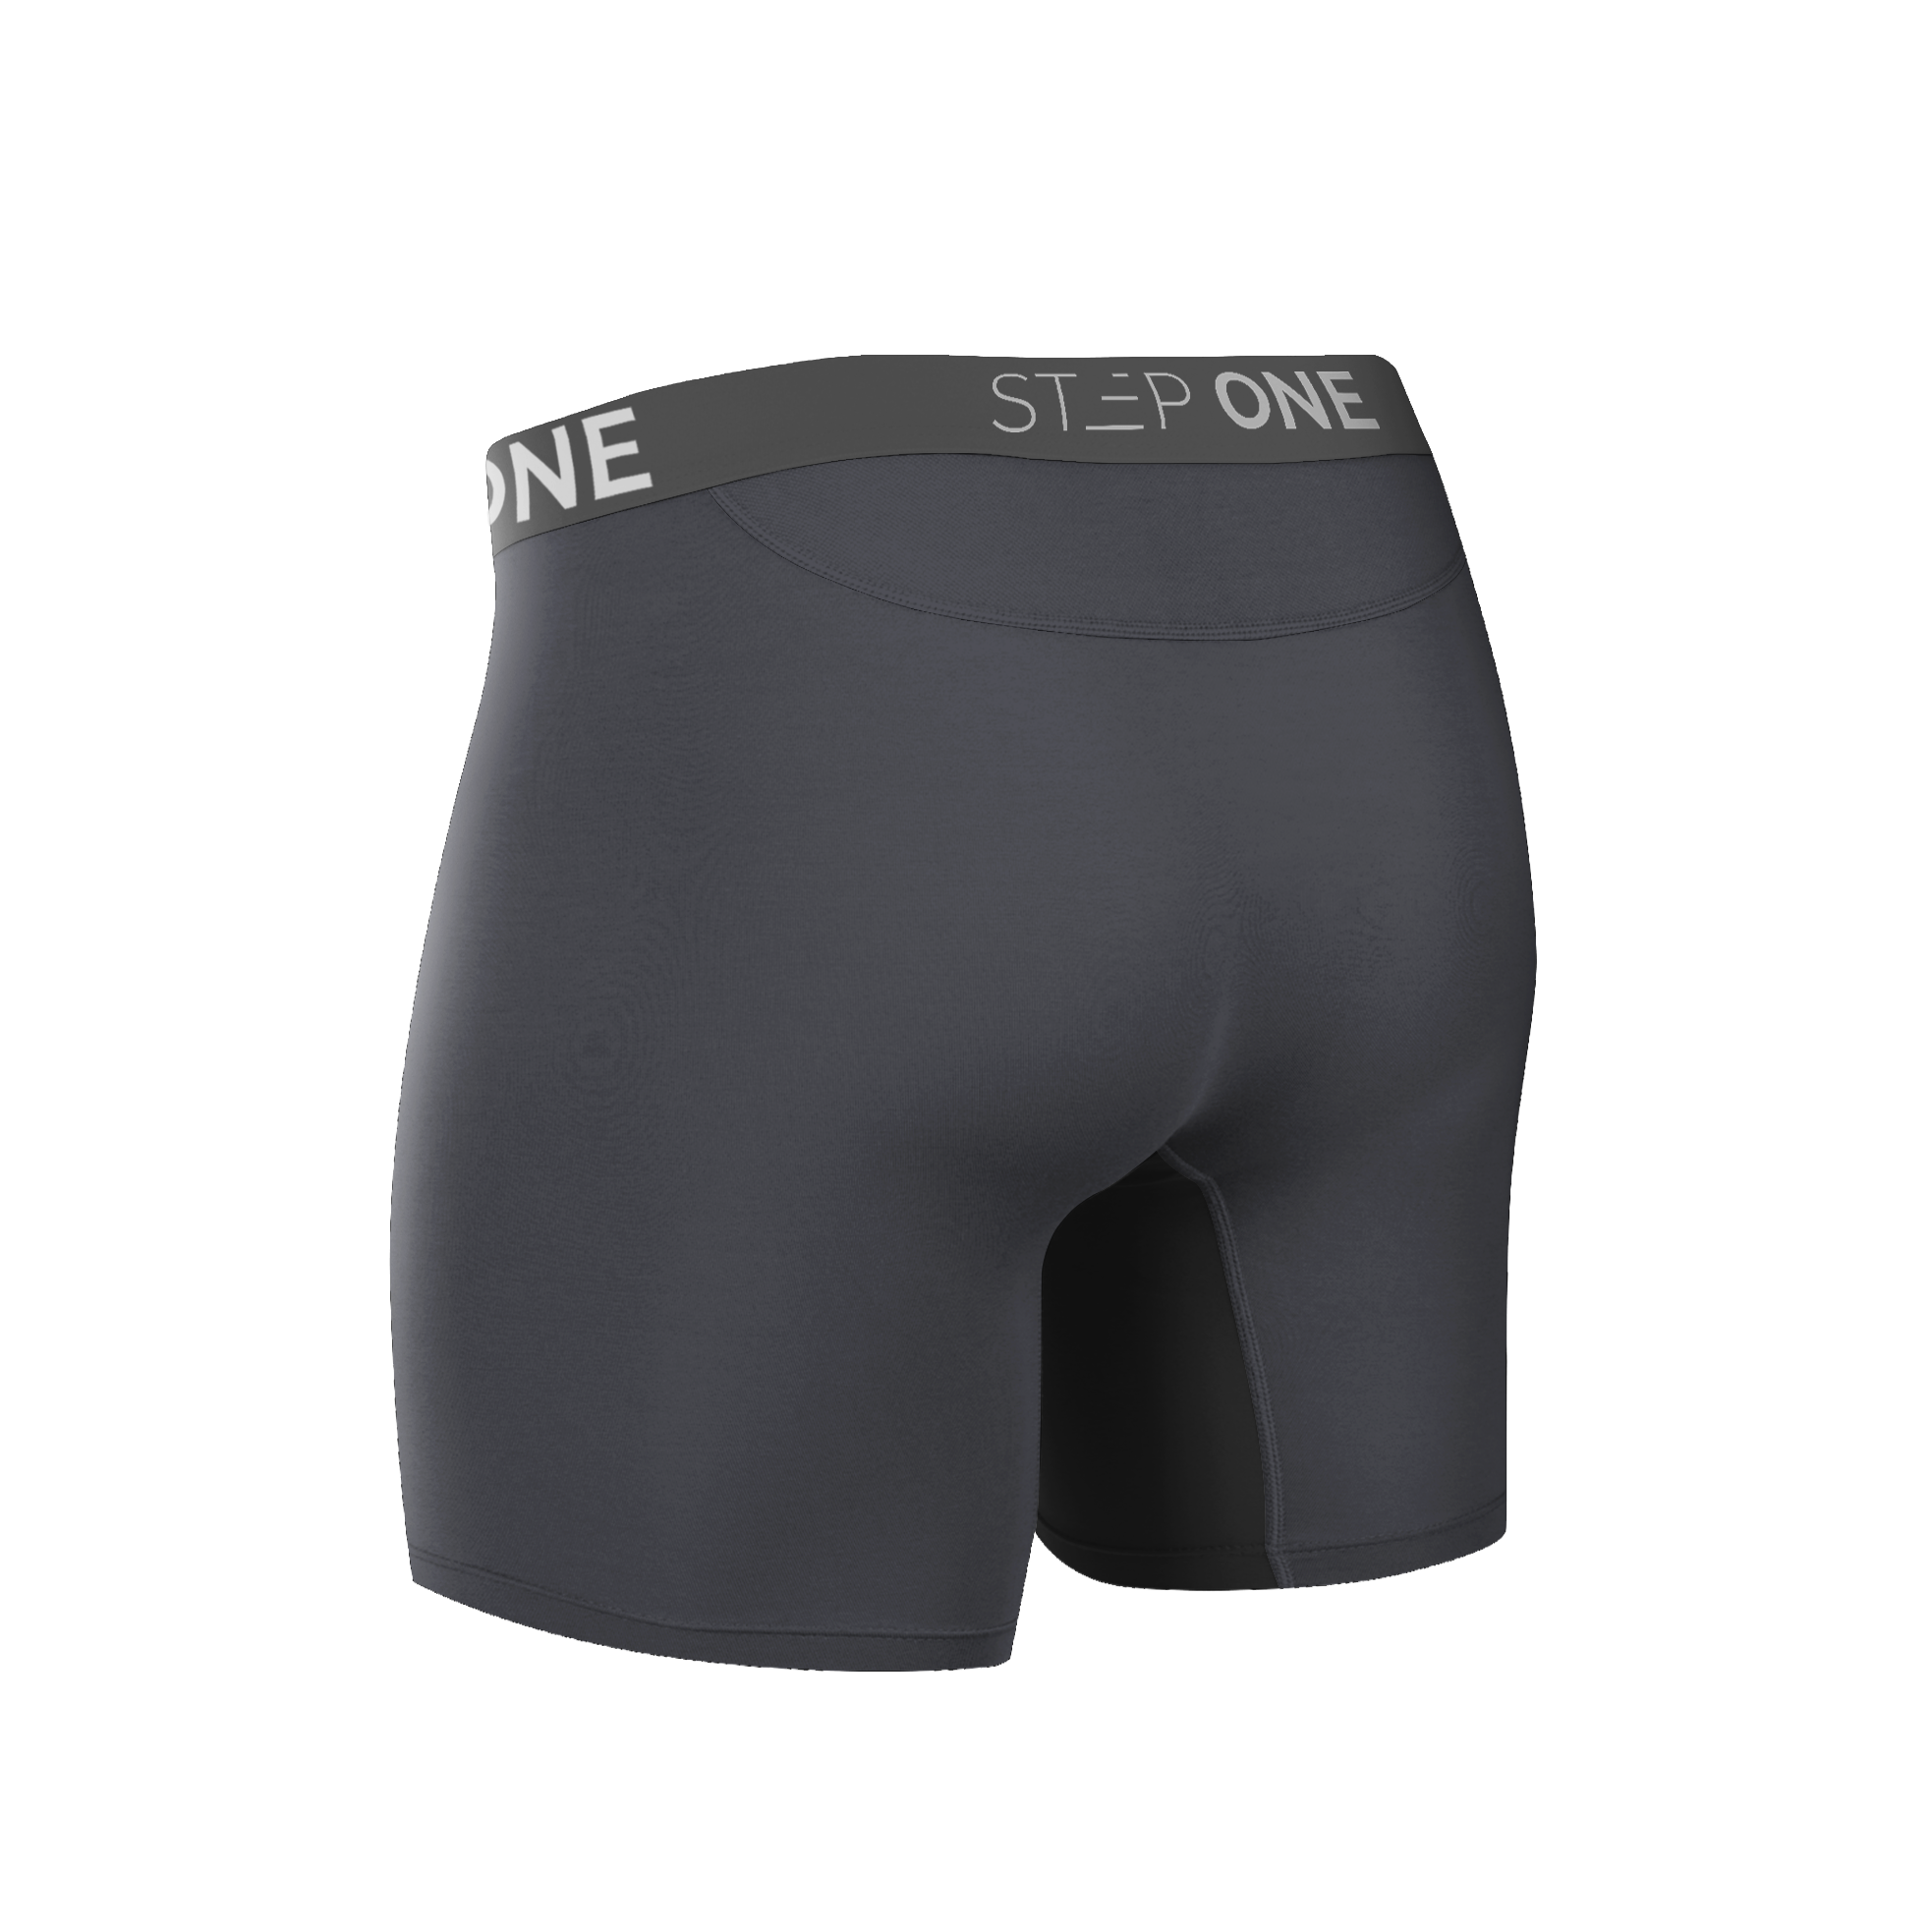 STEP ONE BOXER BRIEFS - LONGER - SEALED - FAST DISPATCH - TRUSTED